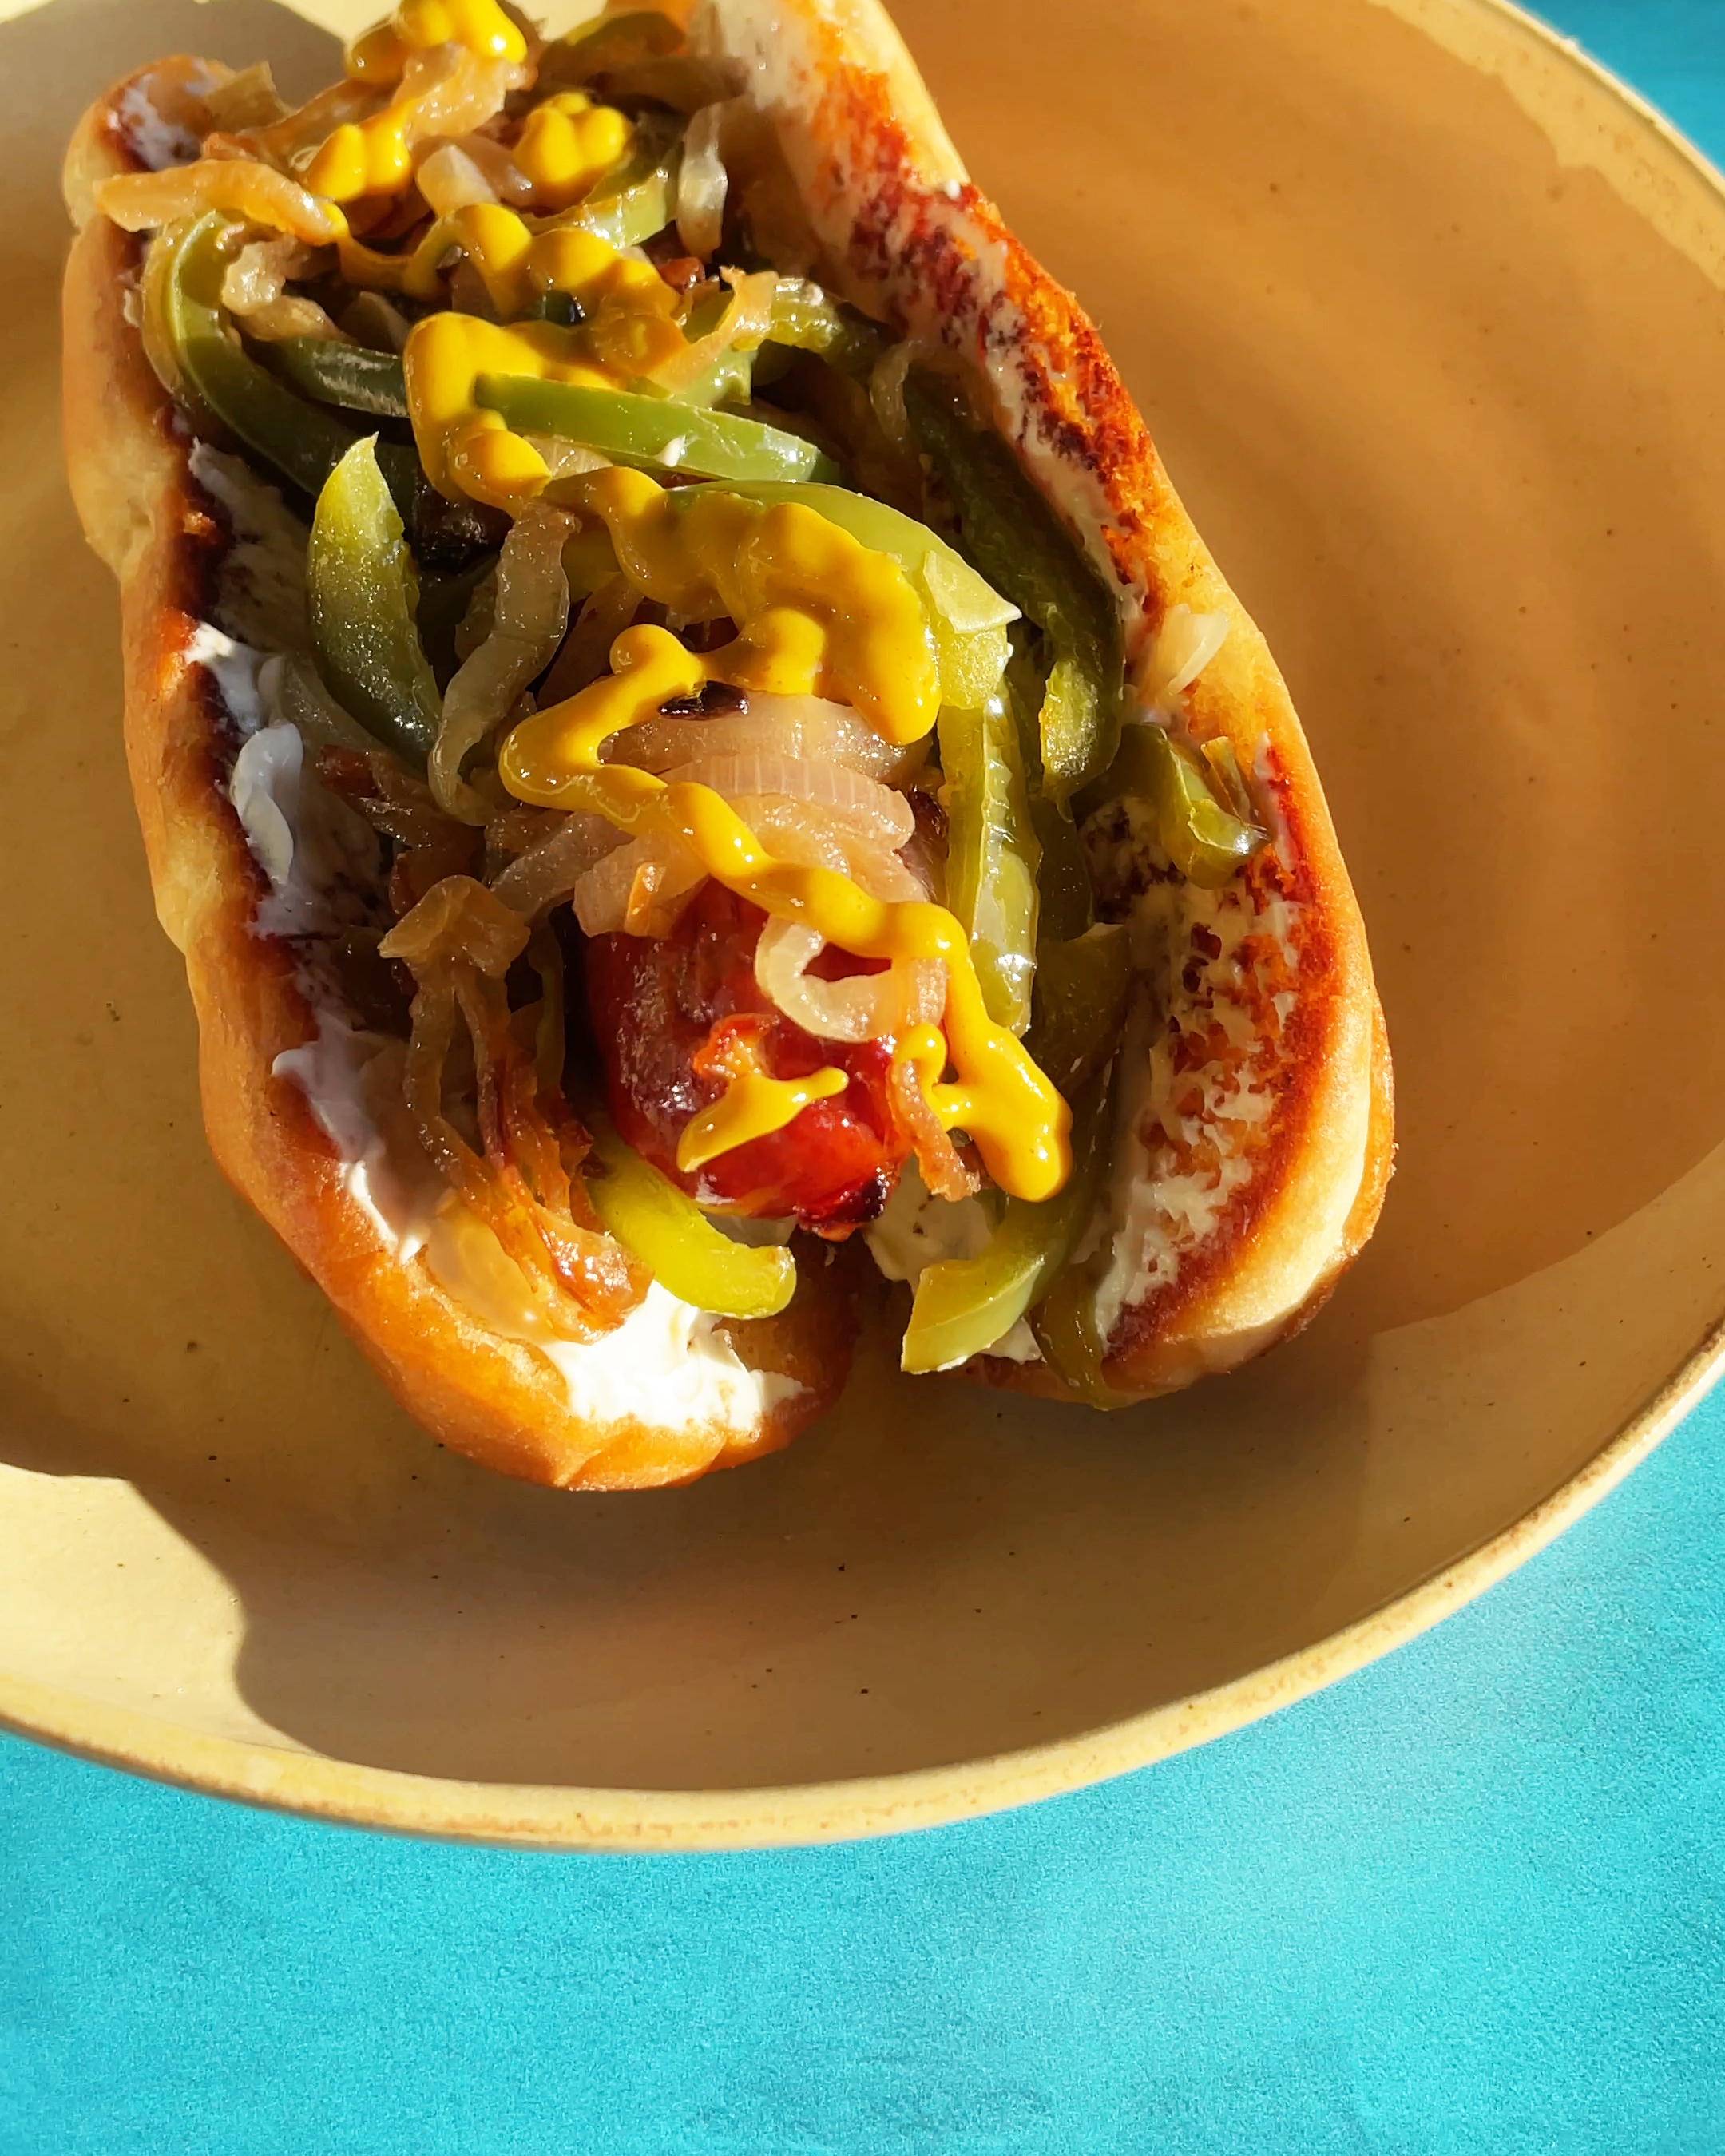 Chrissy's Spicy Seattle Hot Dog